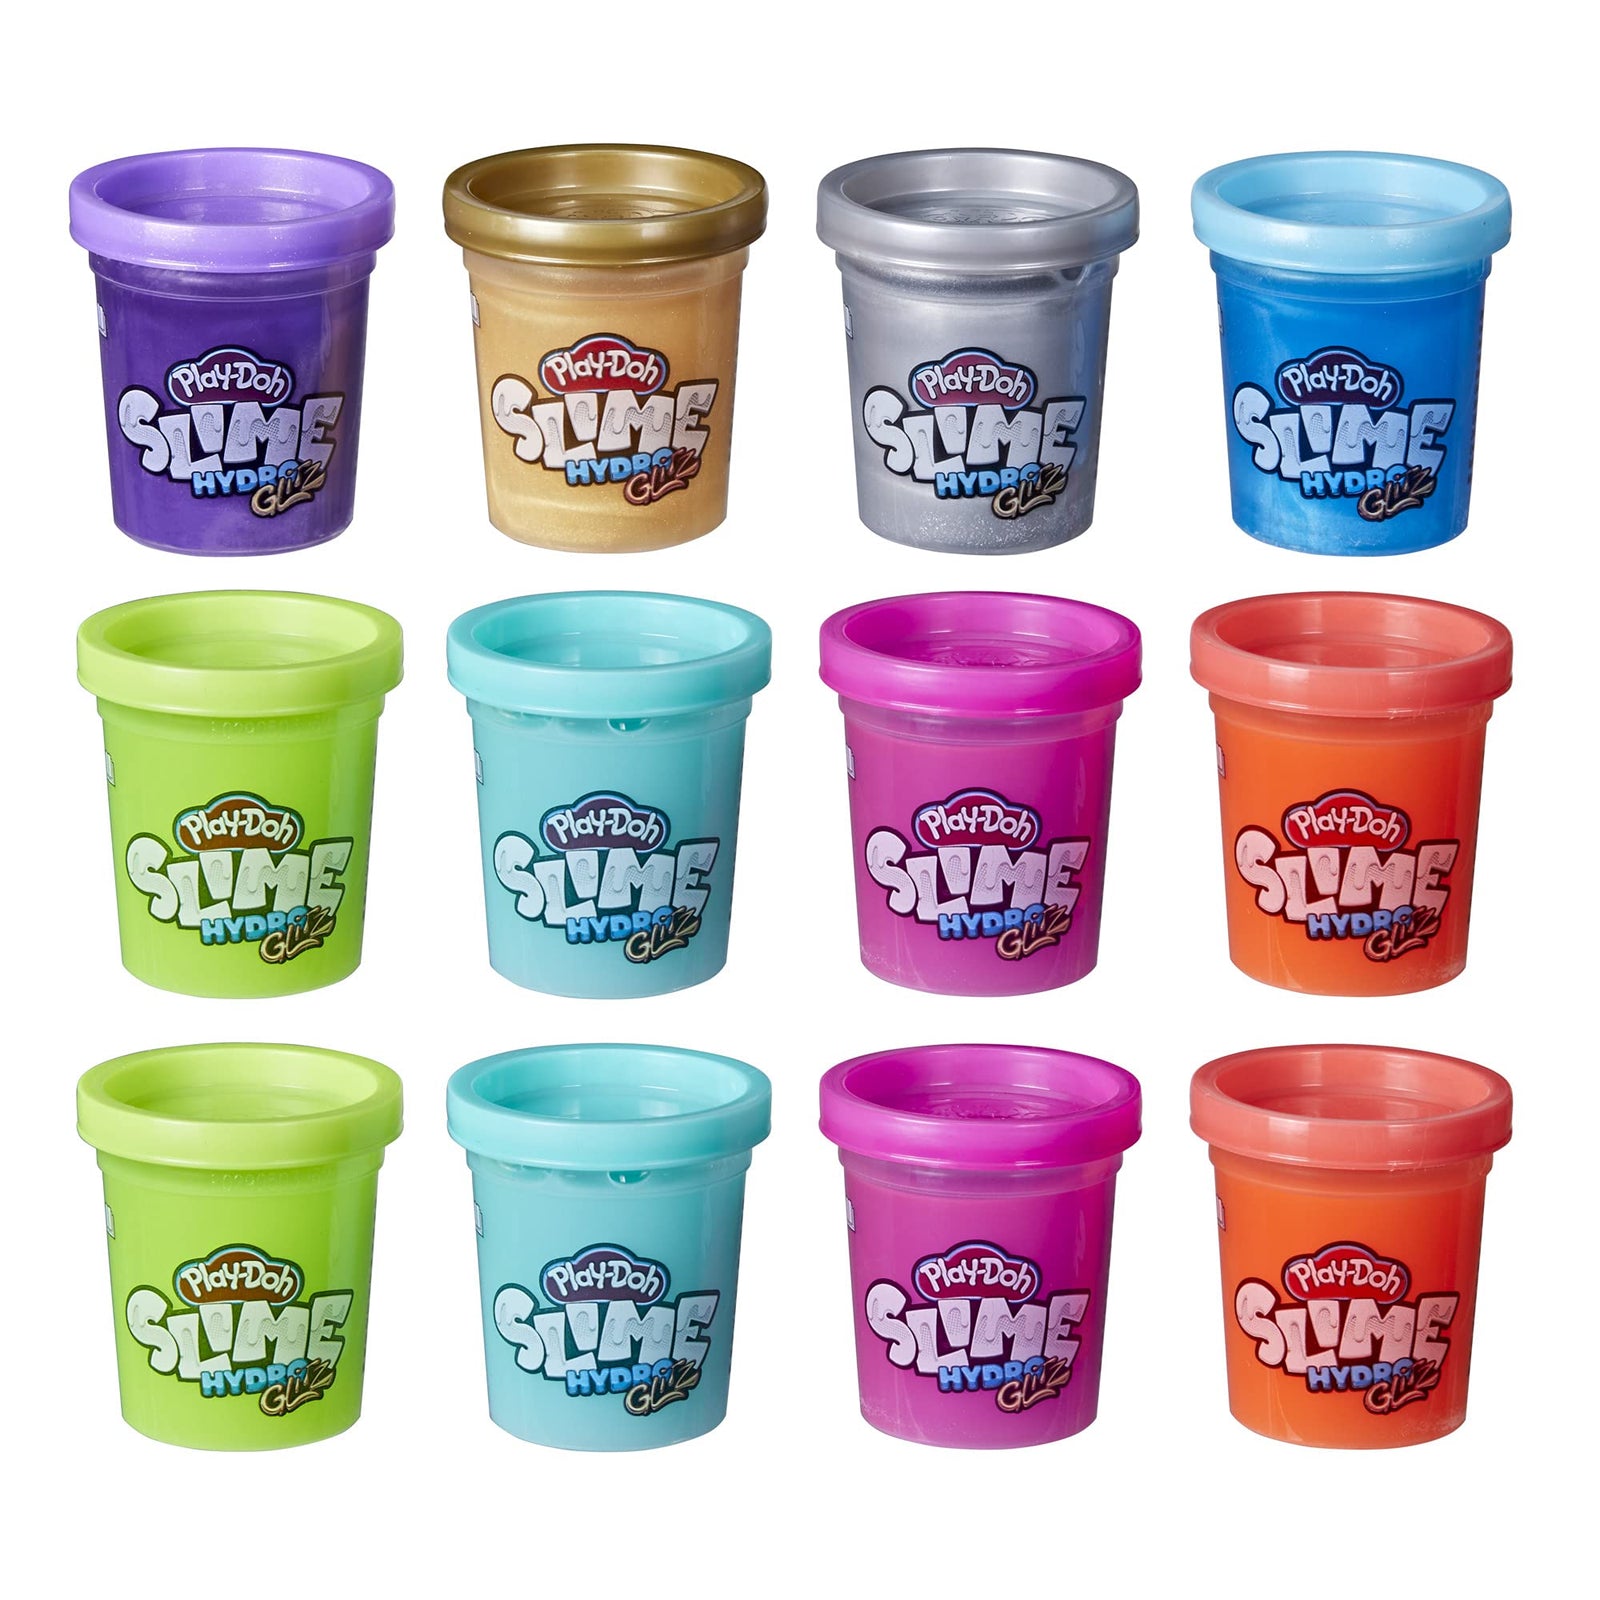 Play-Doh Slime HydroGlitz 12 Multipack of Assorted Metallic Colors for Kids 3 Years and Up, Slippery and Smooth Texture, Non-Toxic (Amazon Exclusive)